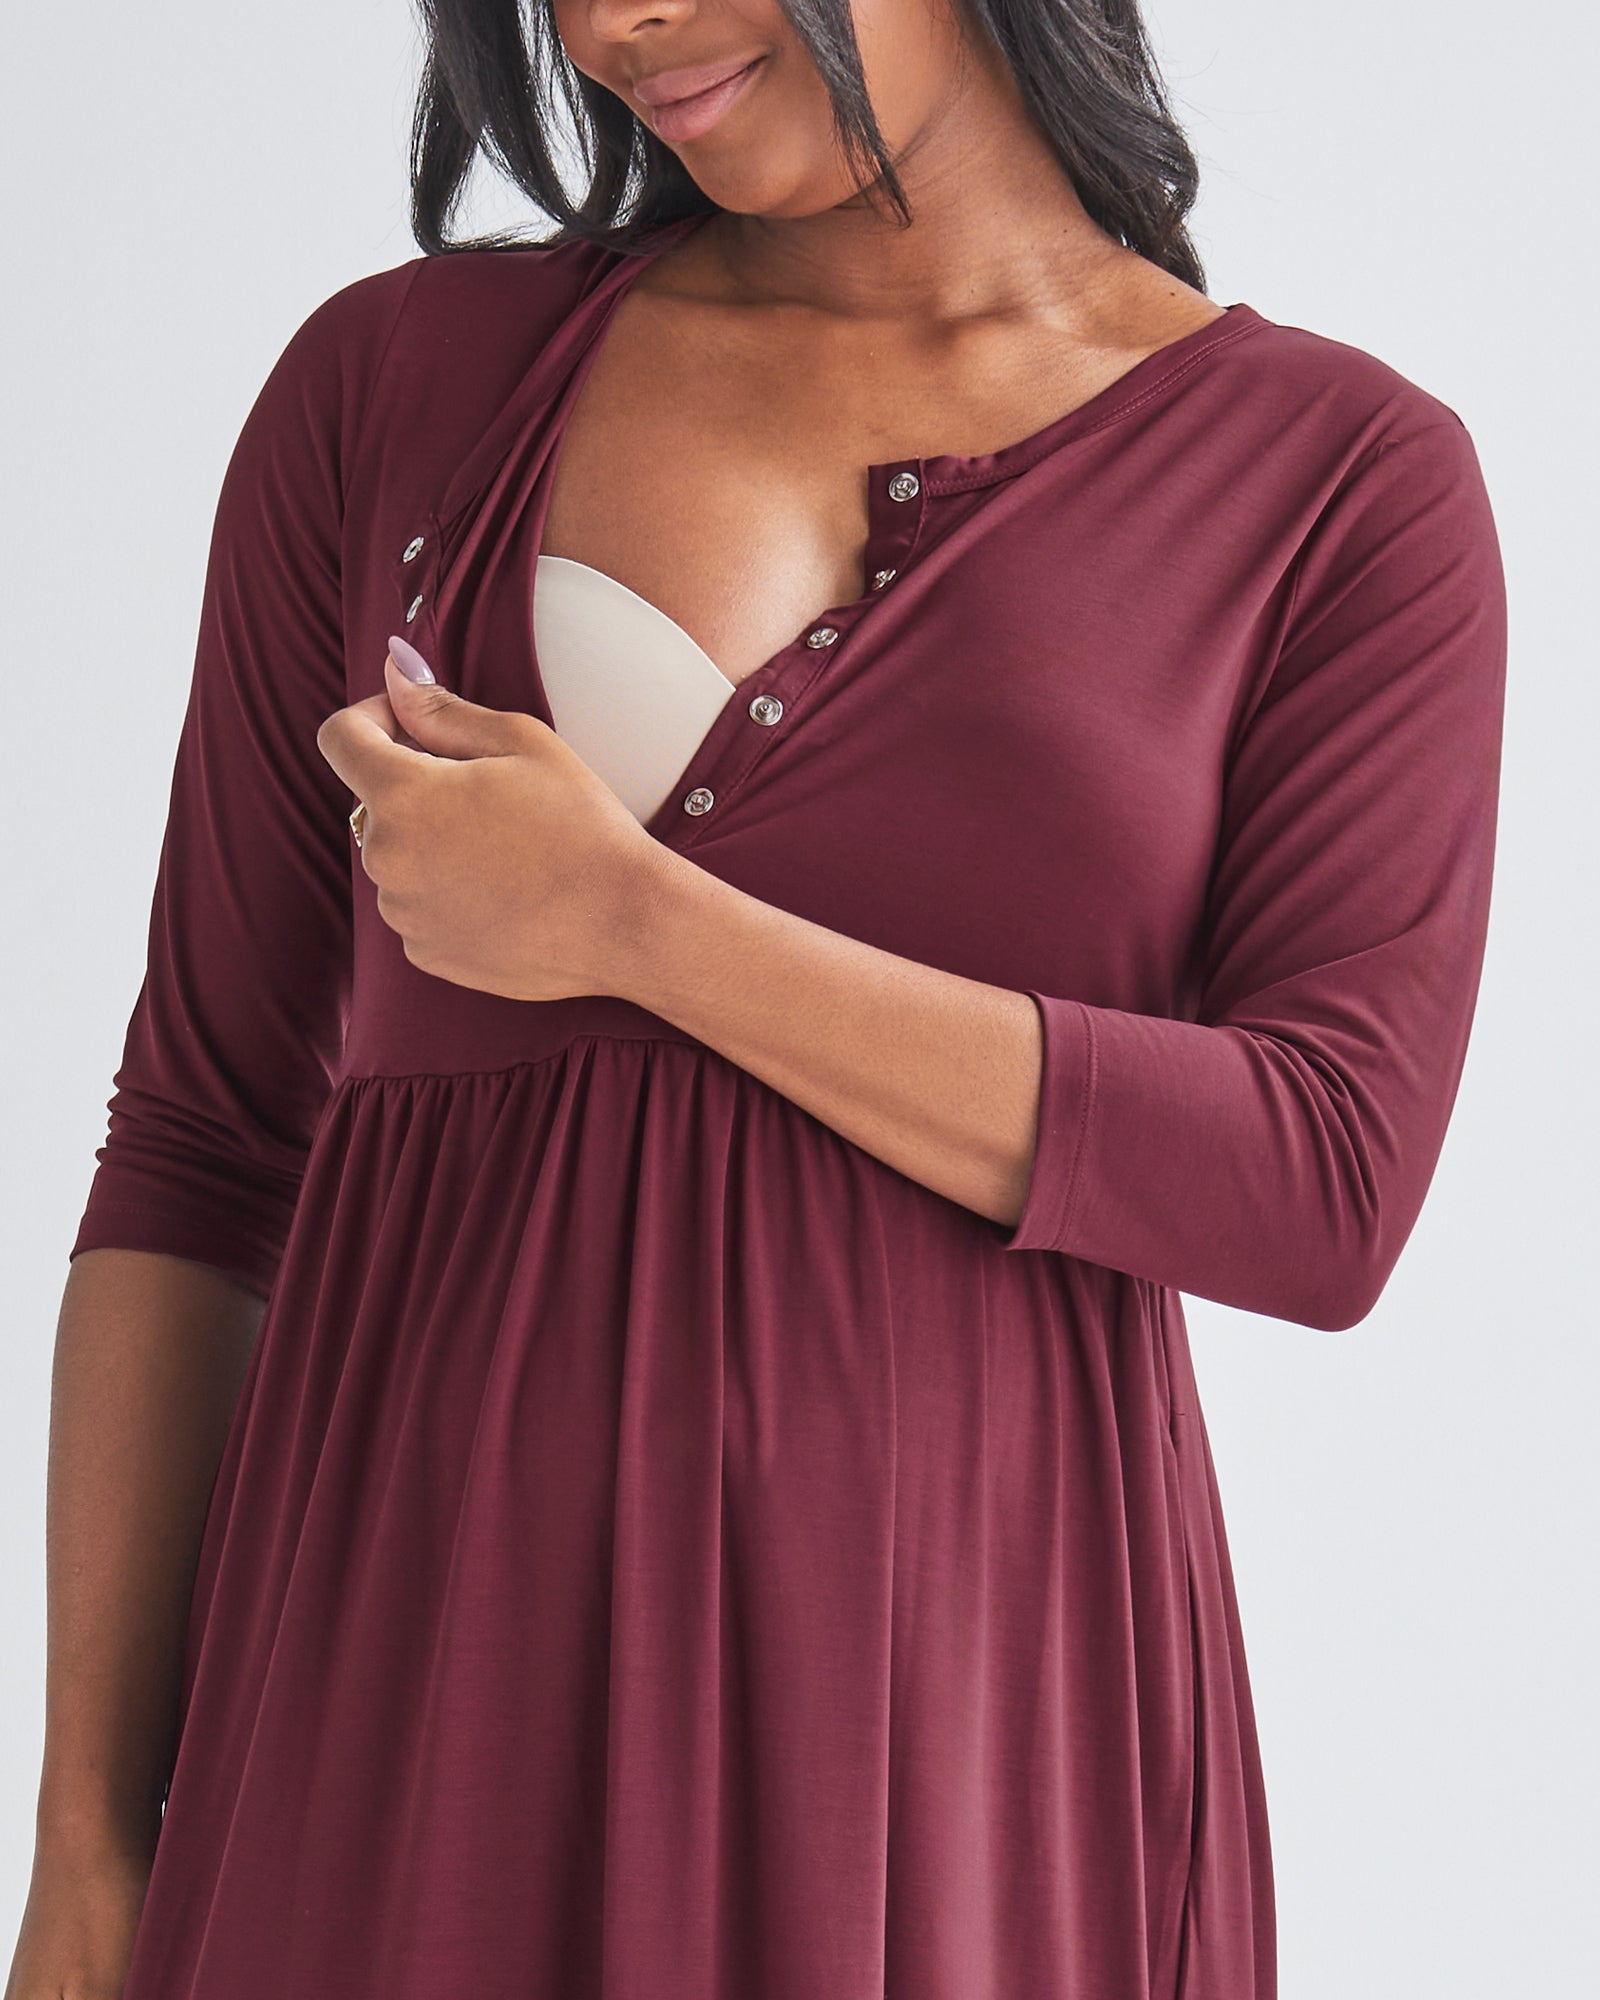 Breastfeeding Access - A Pregnannt Woman Wearing Tiered Maternity Midi Dress in Burgundy from Angel Maternity Showing Easy Access to Breastfeeding.